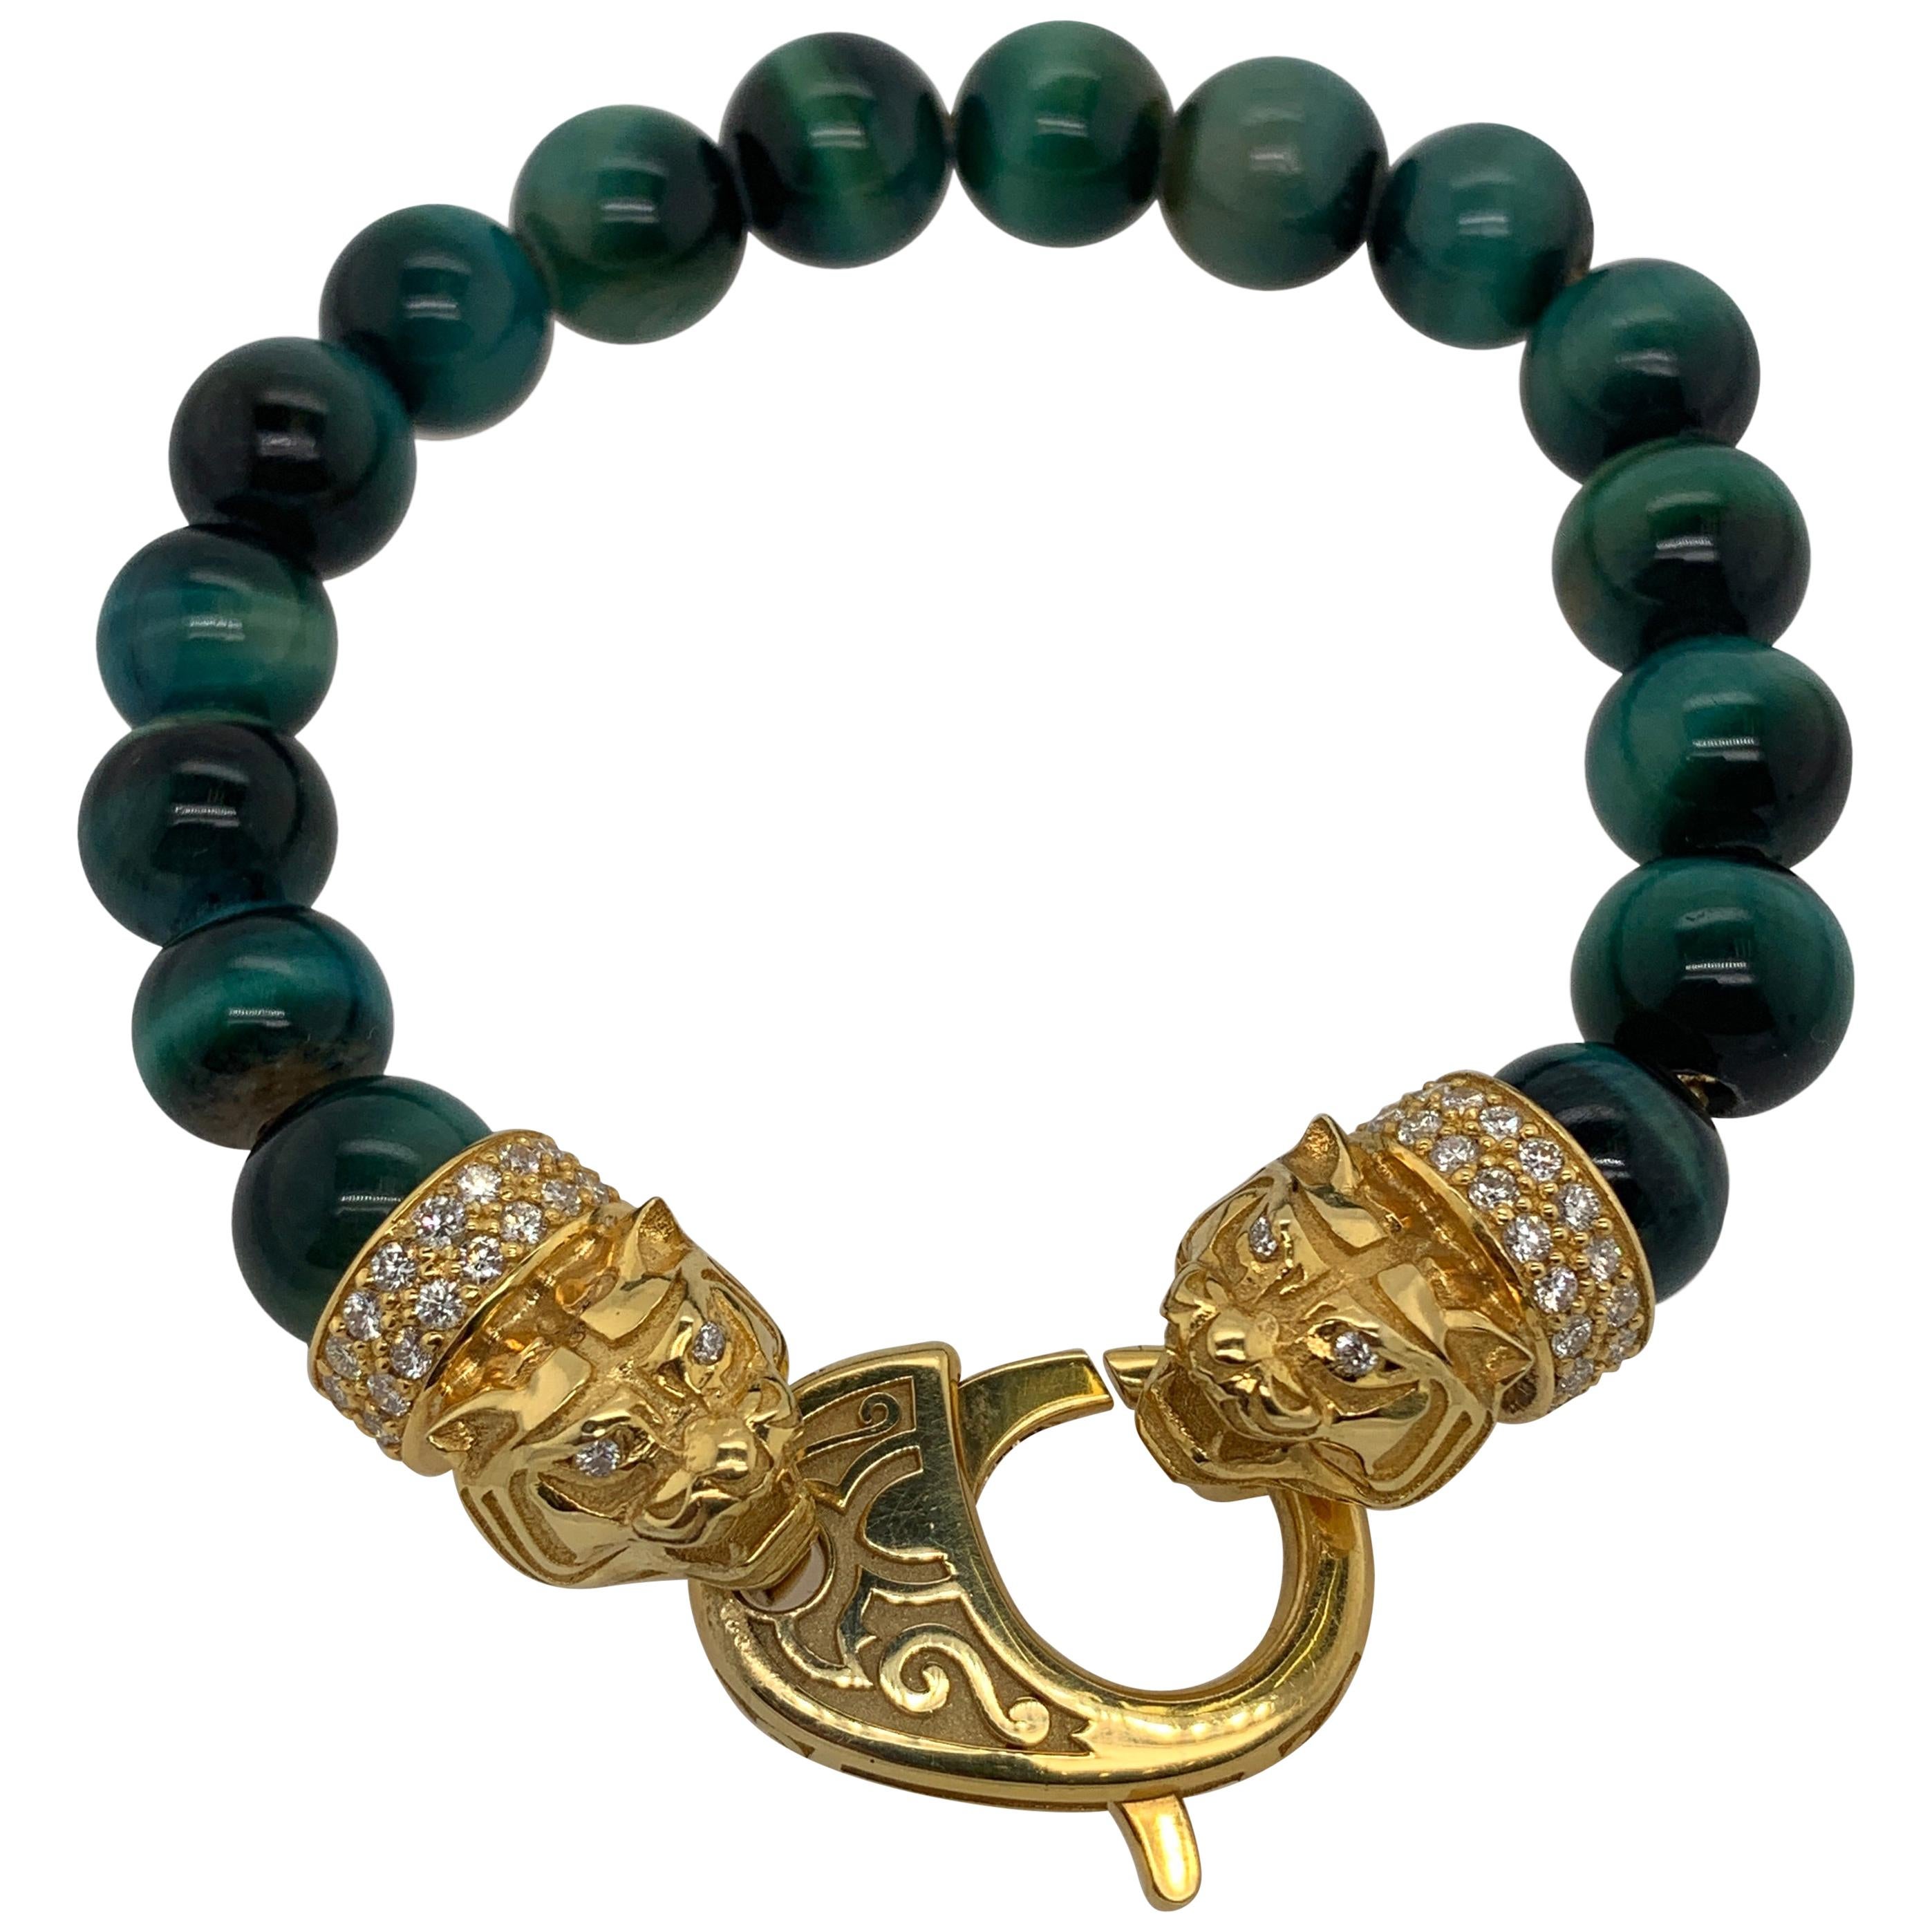 The Tiger Malachite Bracelet
White Diamonds set on Yellow Gold Bracelet with Malachite Beads.
Crafted to order. Please allow up to 3 weeks for delivery.